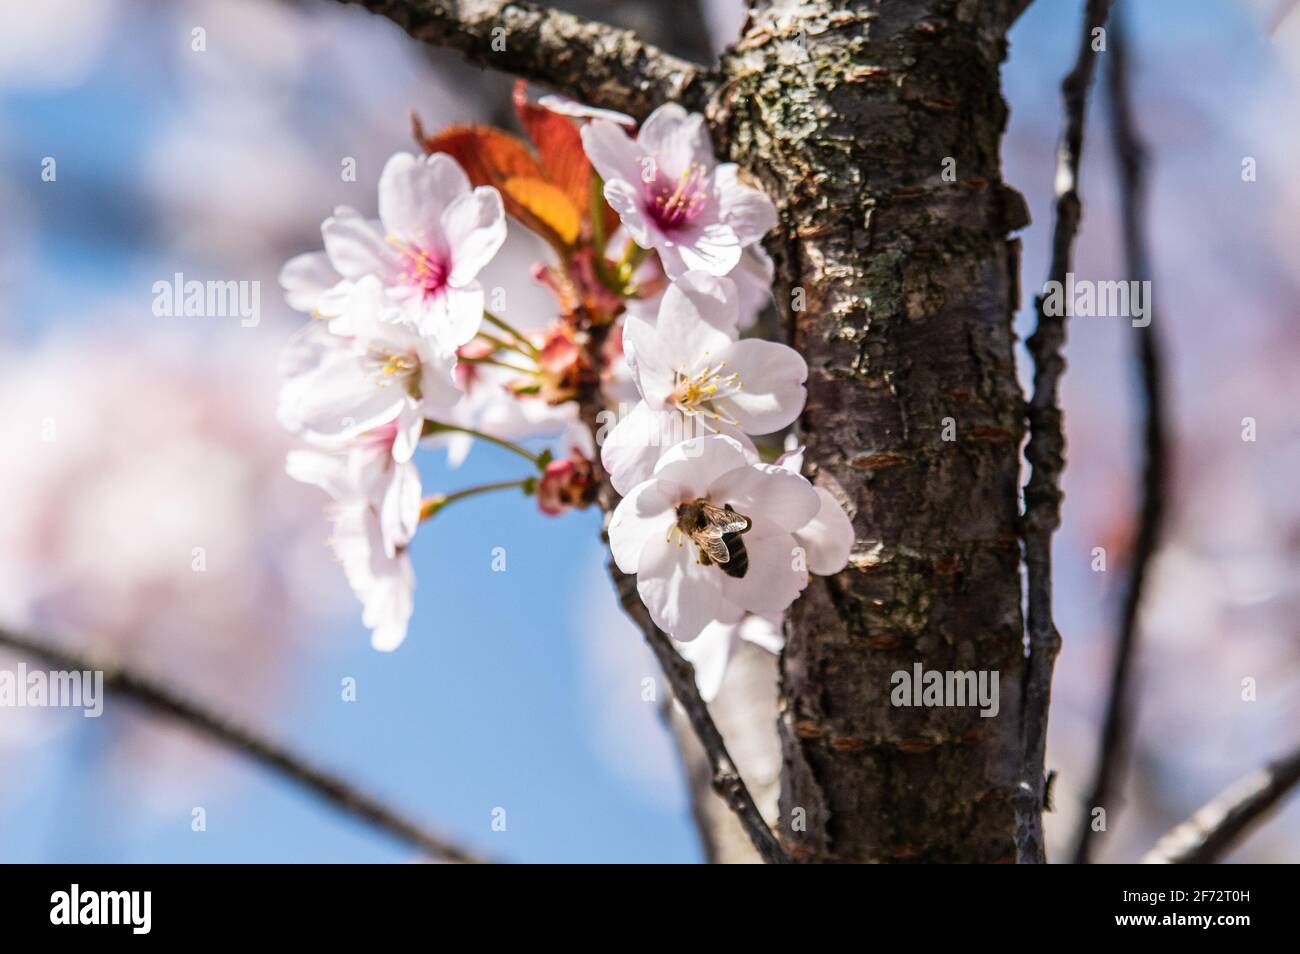 Birmingham, West Midlands, UK. 4th April 2021. A bee takes a sip of nectar from a cherry blossom tree this Easter Sunday. Credit: Ryan Underwood / Alamy Live News Stock Photo